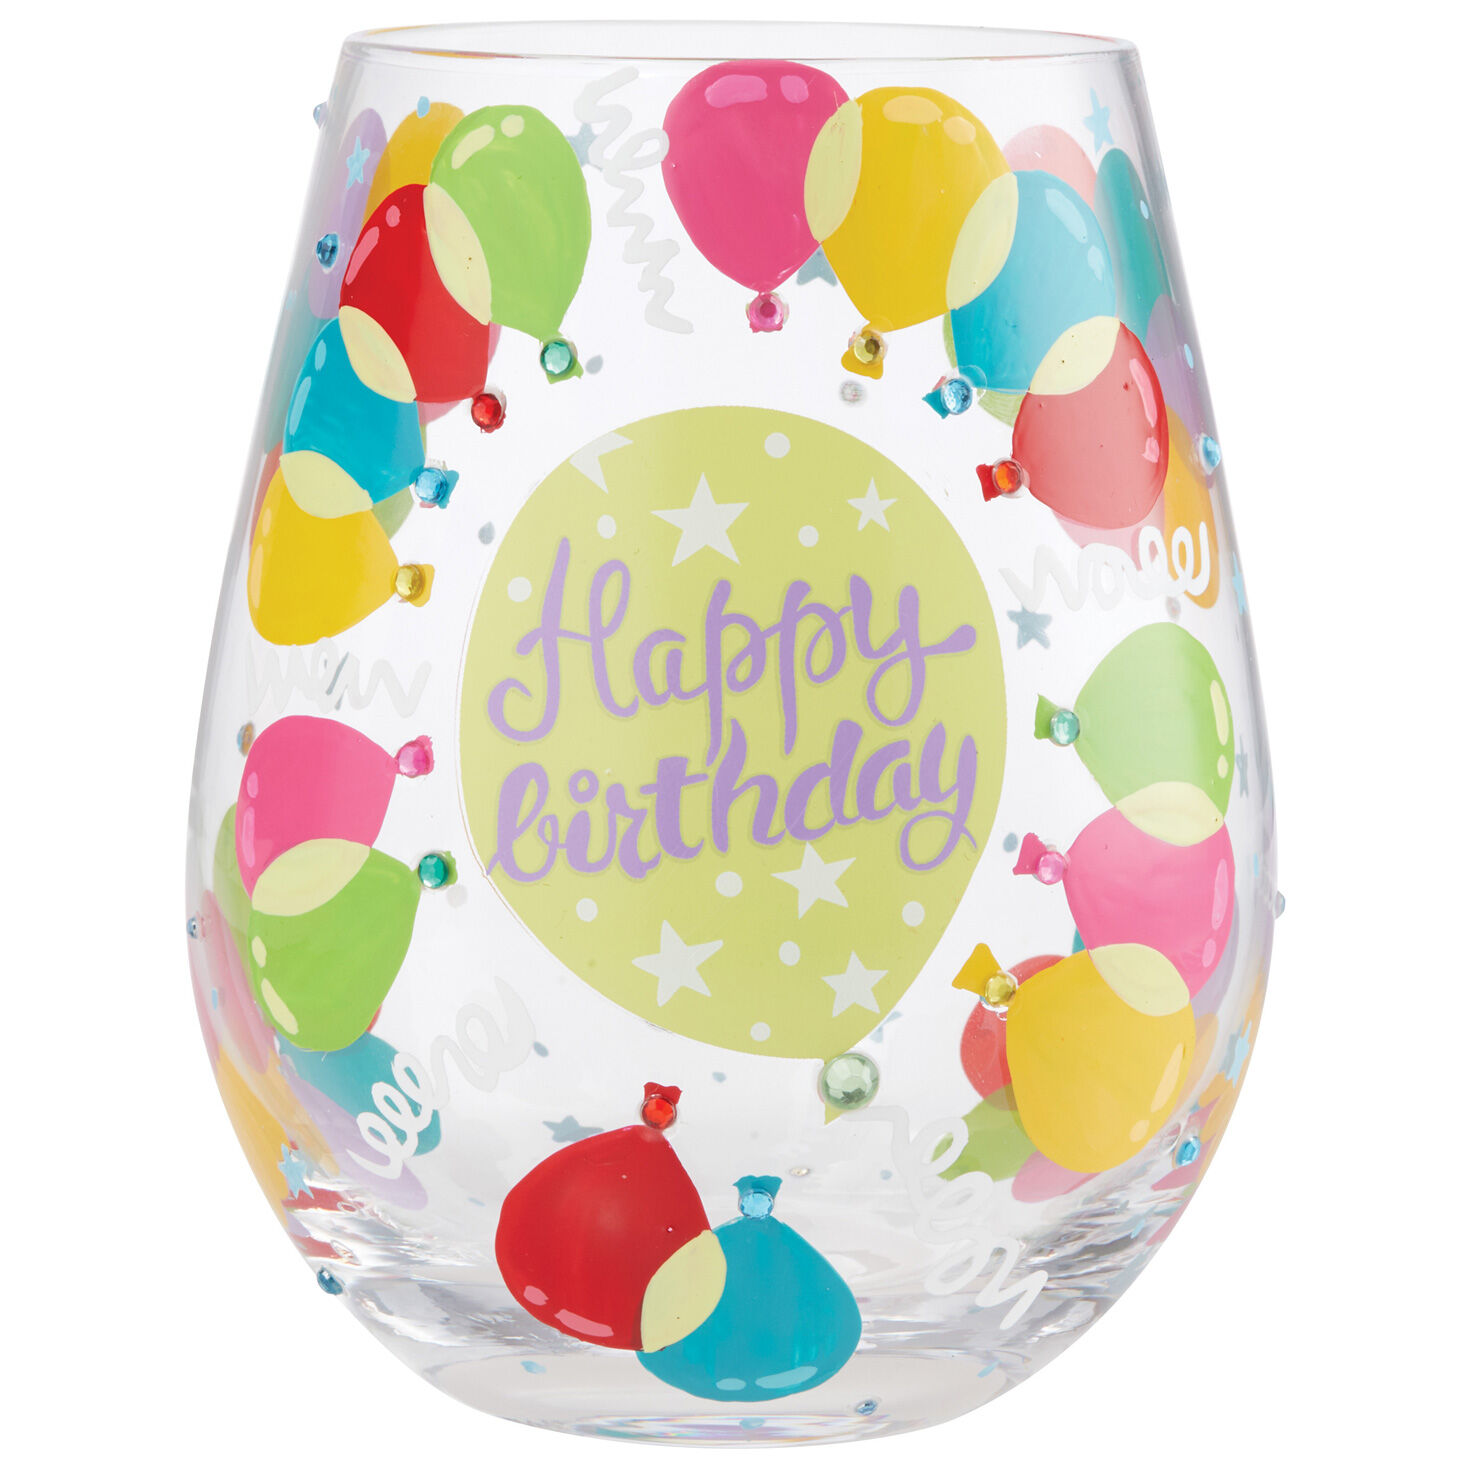 https://www.hallmark.com/dw/image/v2/AALB_PRD/on/demandware.static/-/Sites-hallmark-master/default/dw29cfc0e8/images/finished-goods/products/6008682/Happy-Birthday-Balloons-Painted-Stemless-Wine-Glass_6008682_01.jpg?sfrm=jpg